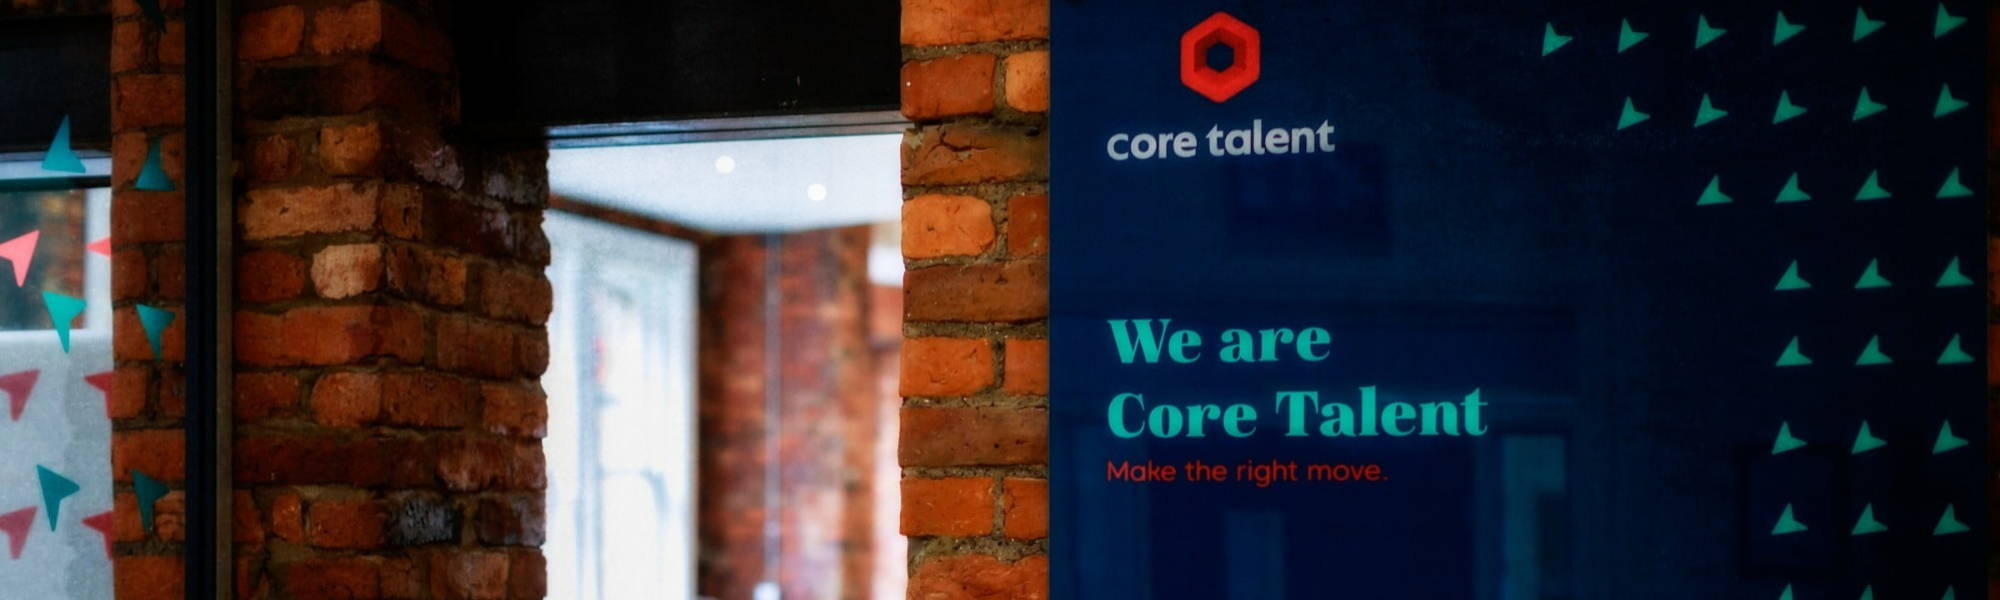 Core Talent Offices Manchester